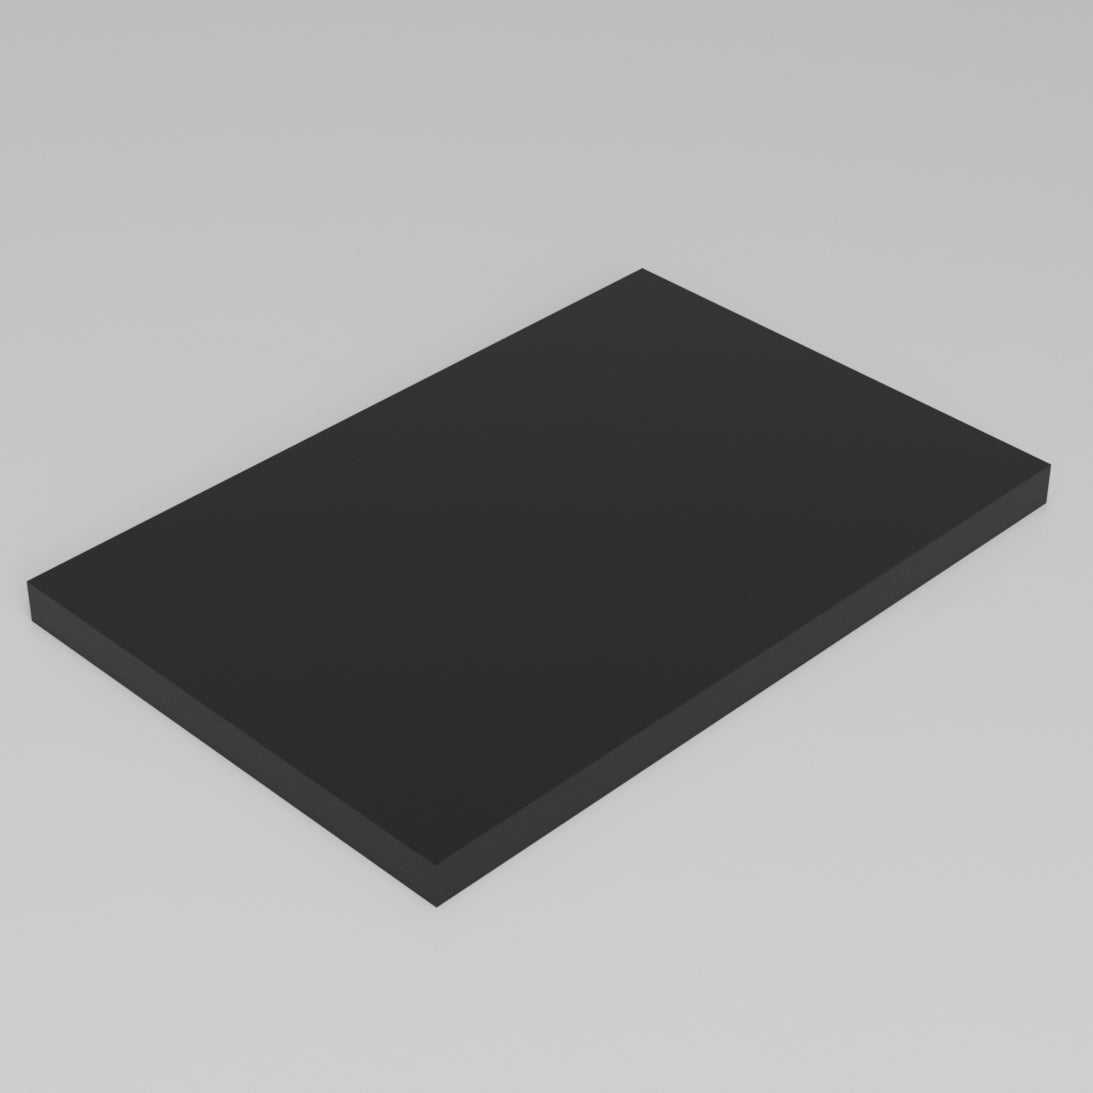 Machinable Wax Rectangular Block Front View 1 Inch by 12 Inch by 18 Inch